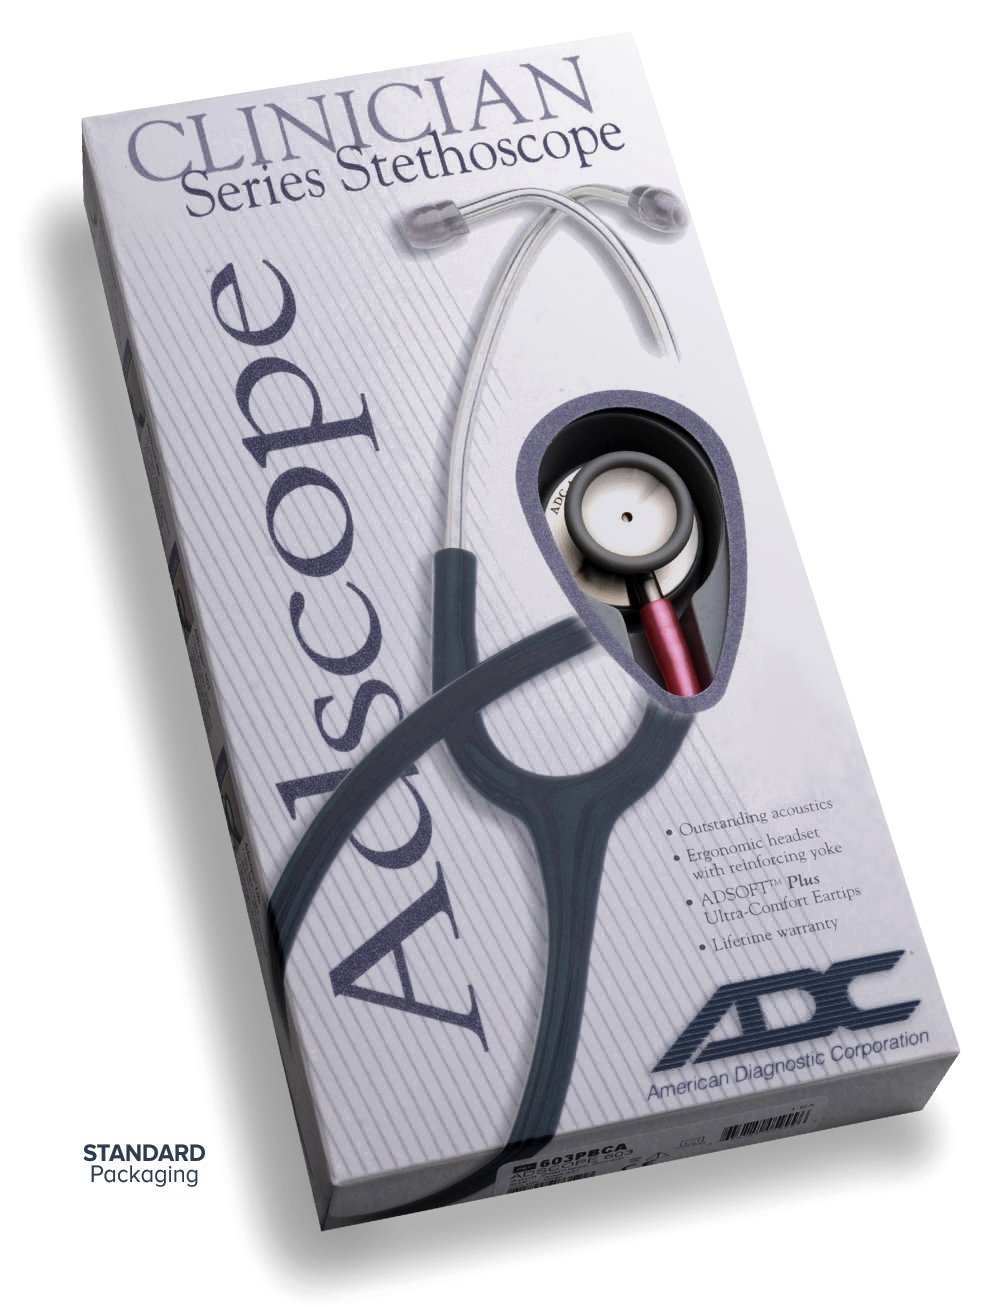 ADC 603 Clinician Stethoscope, Navy, 603N 